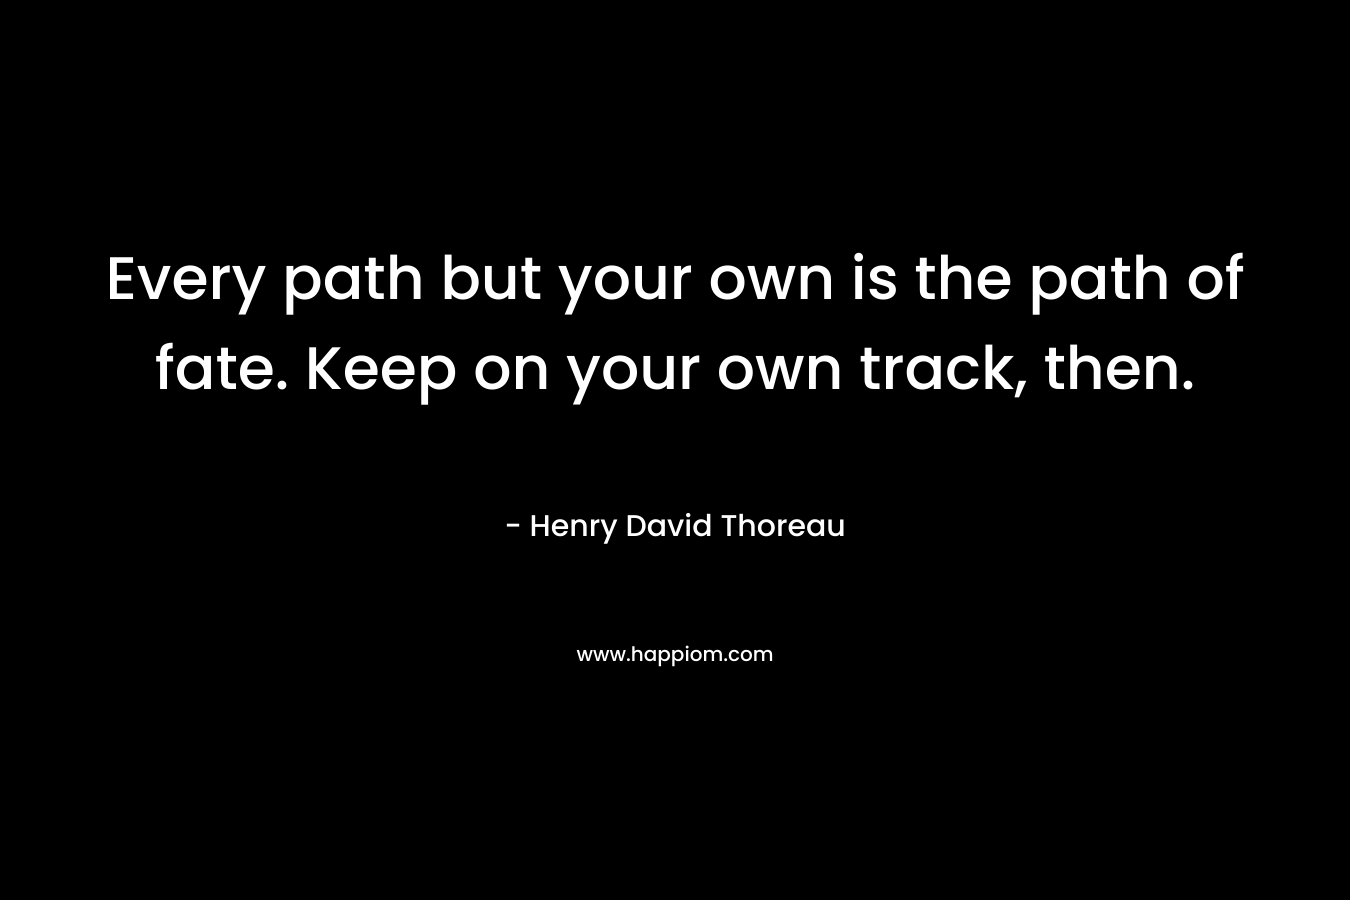 Every path but your own is the path of fate. Keep on your own track, then. – Henry David Thoreau